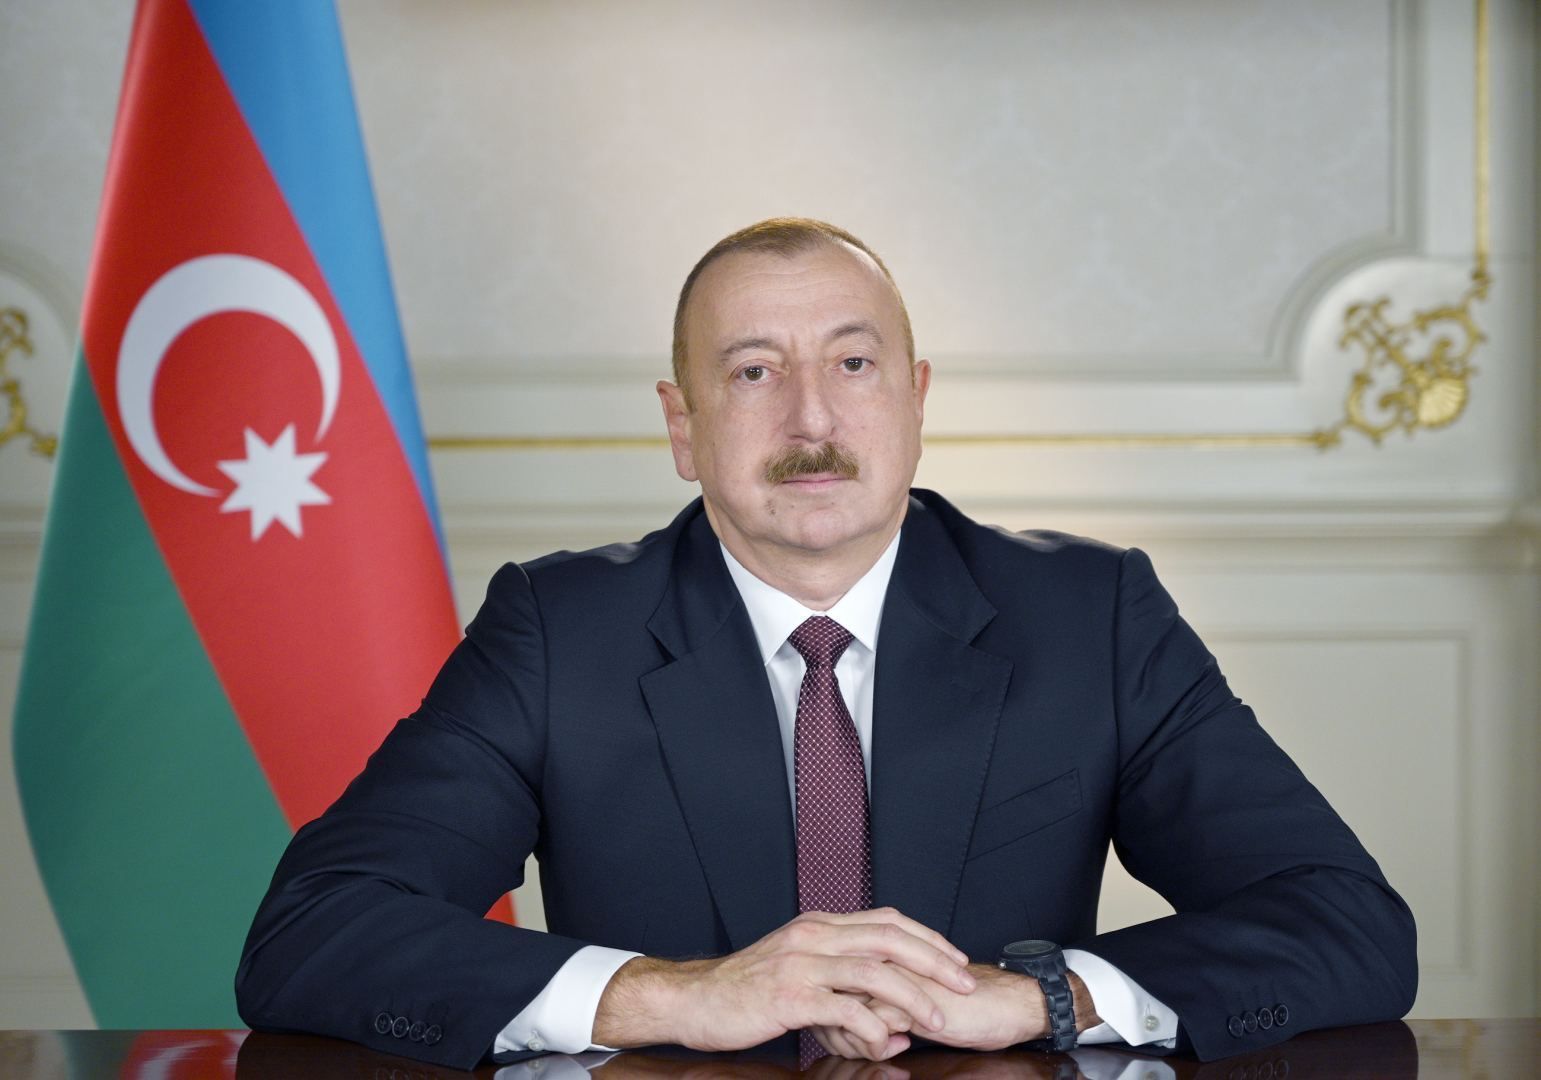 President Ilham Aliyev attends informal lunch of CIS heads of state